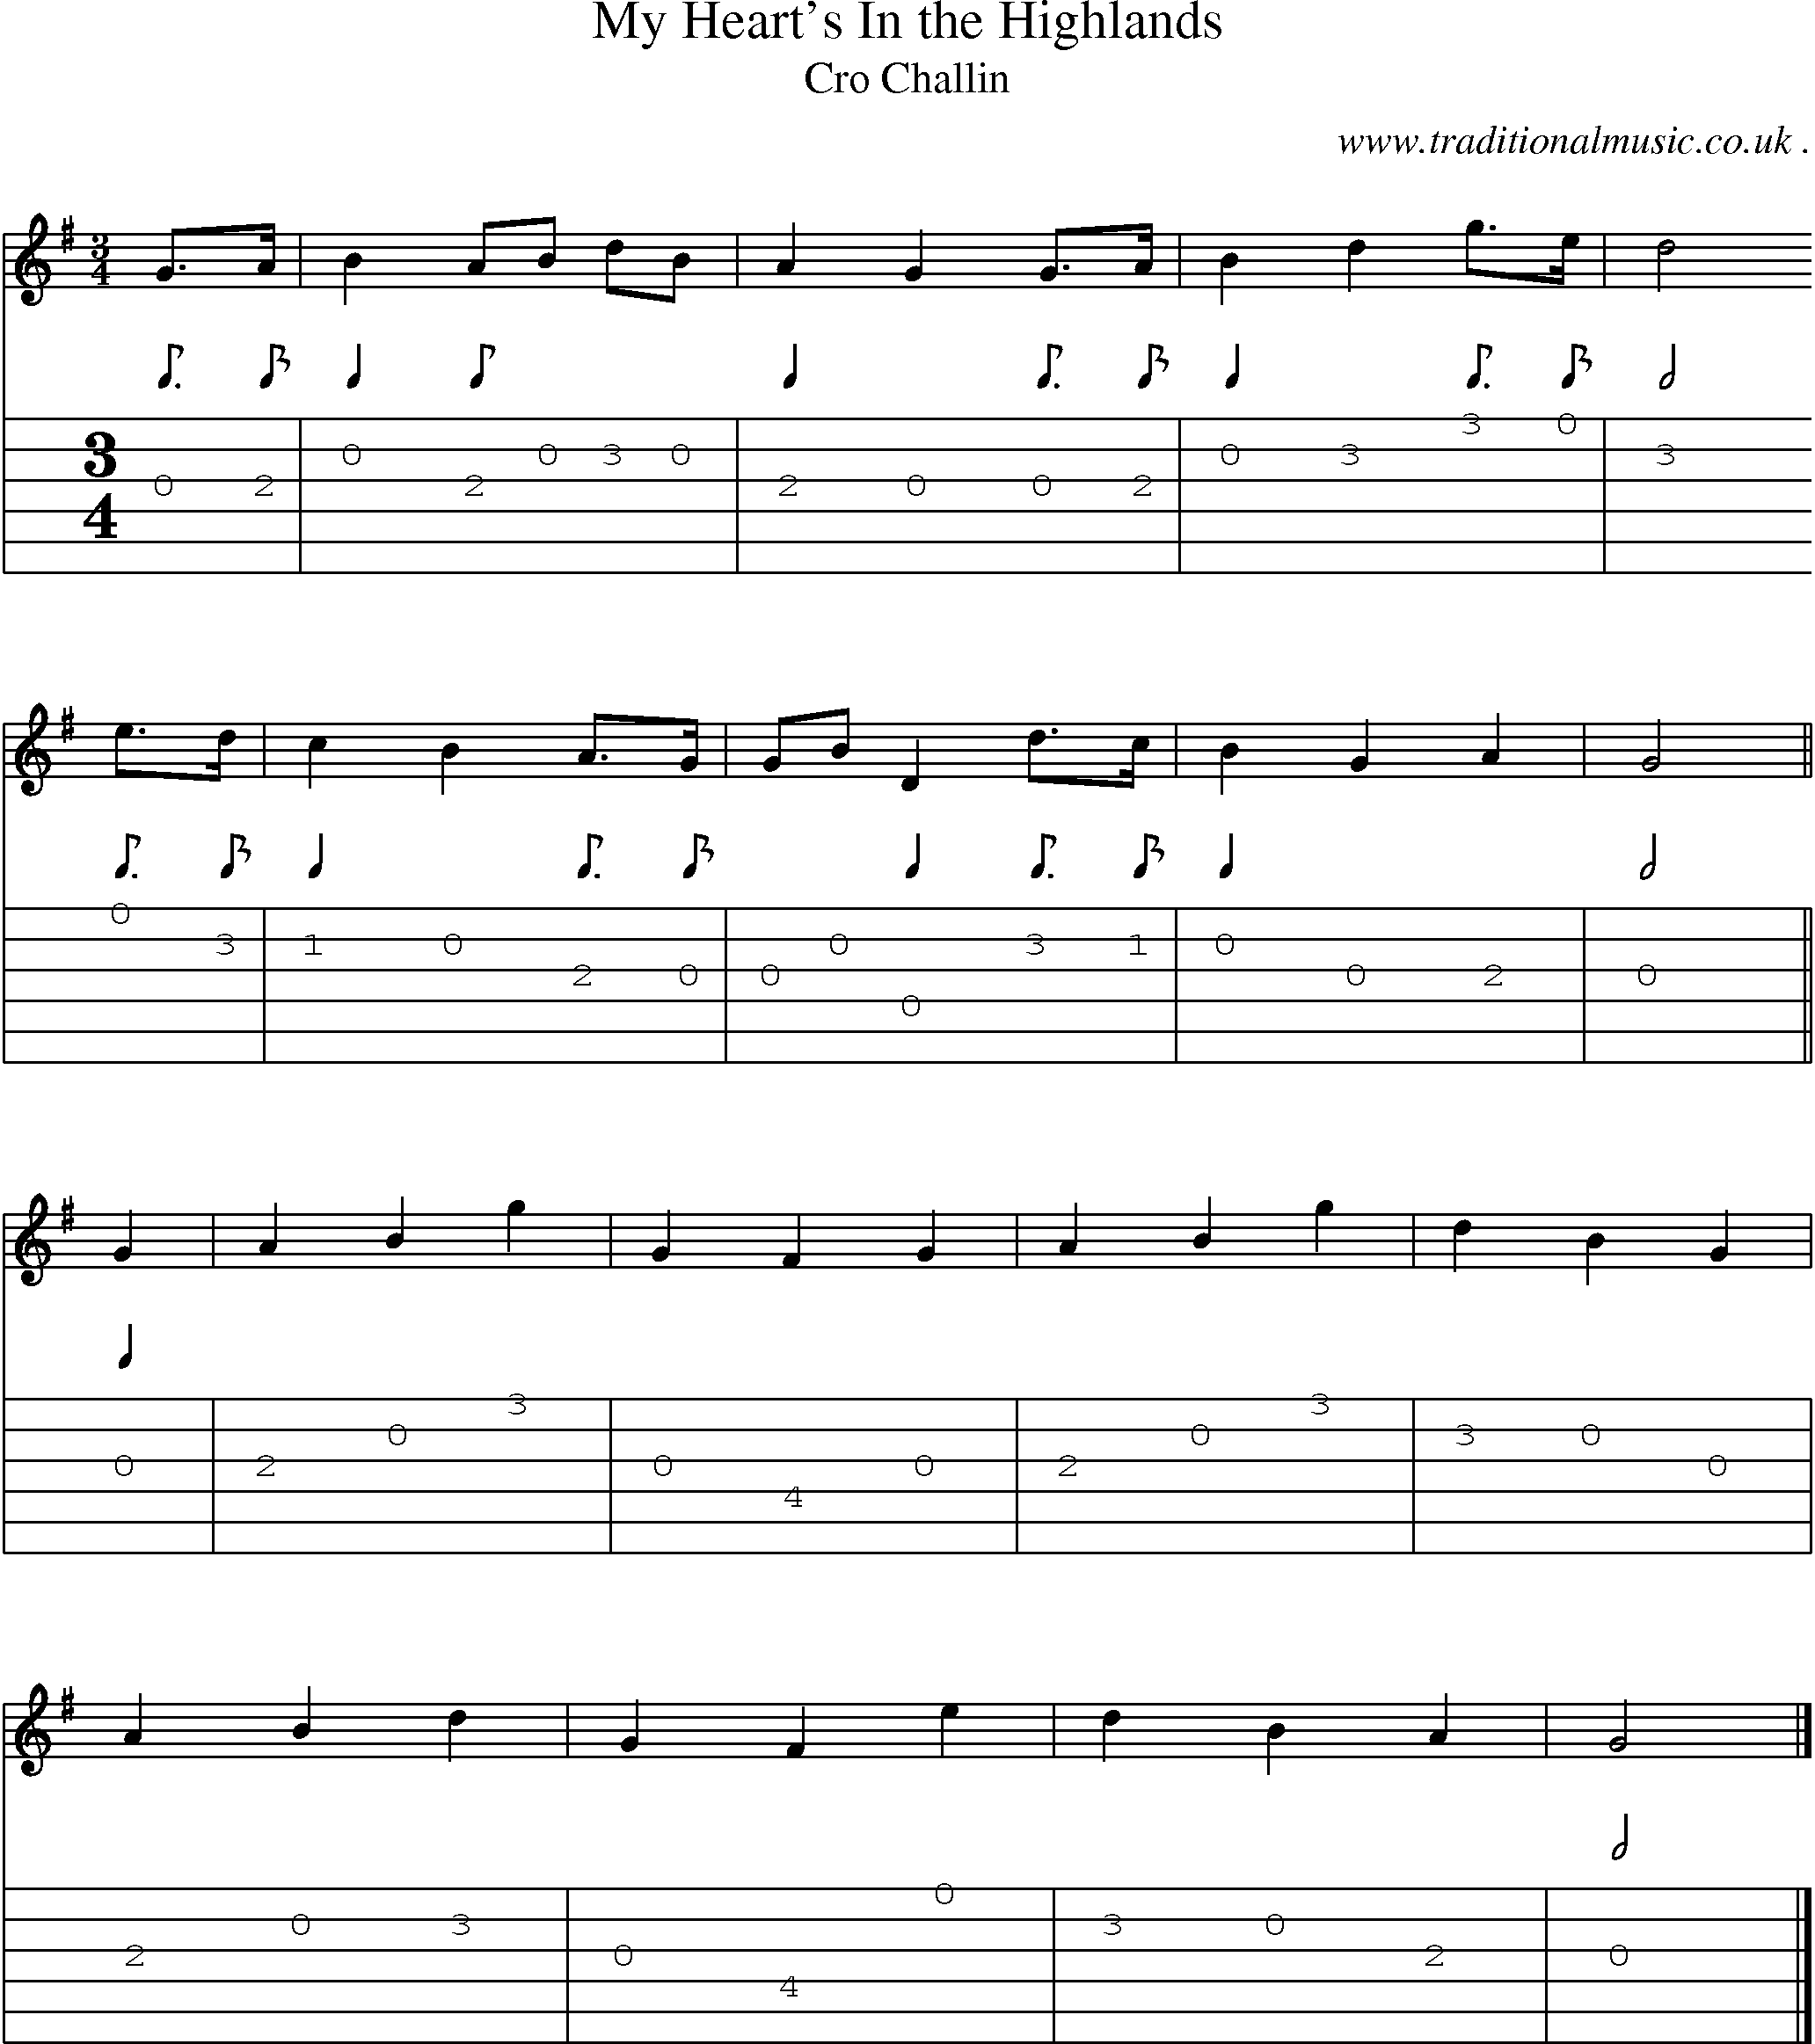 Sheet-music  score, Chords and Guitar Tabs for My Hearts In The Highlands